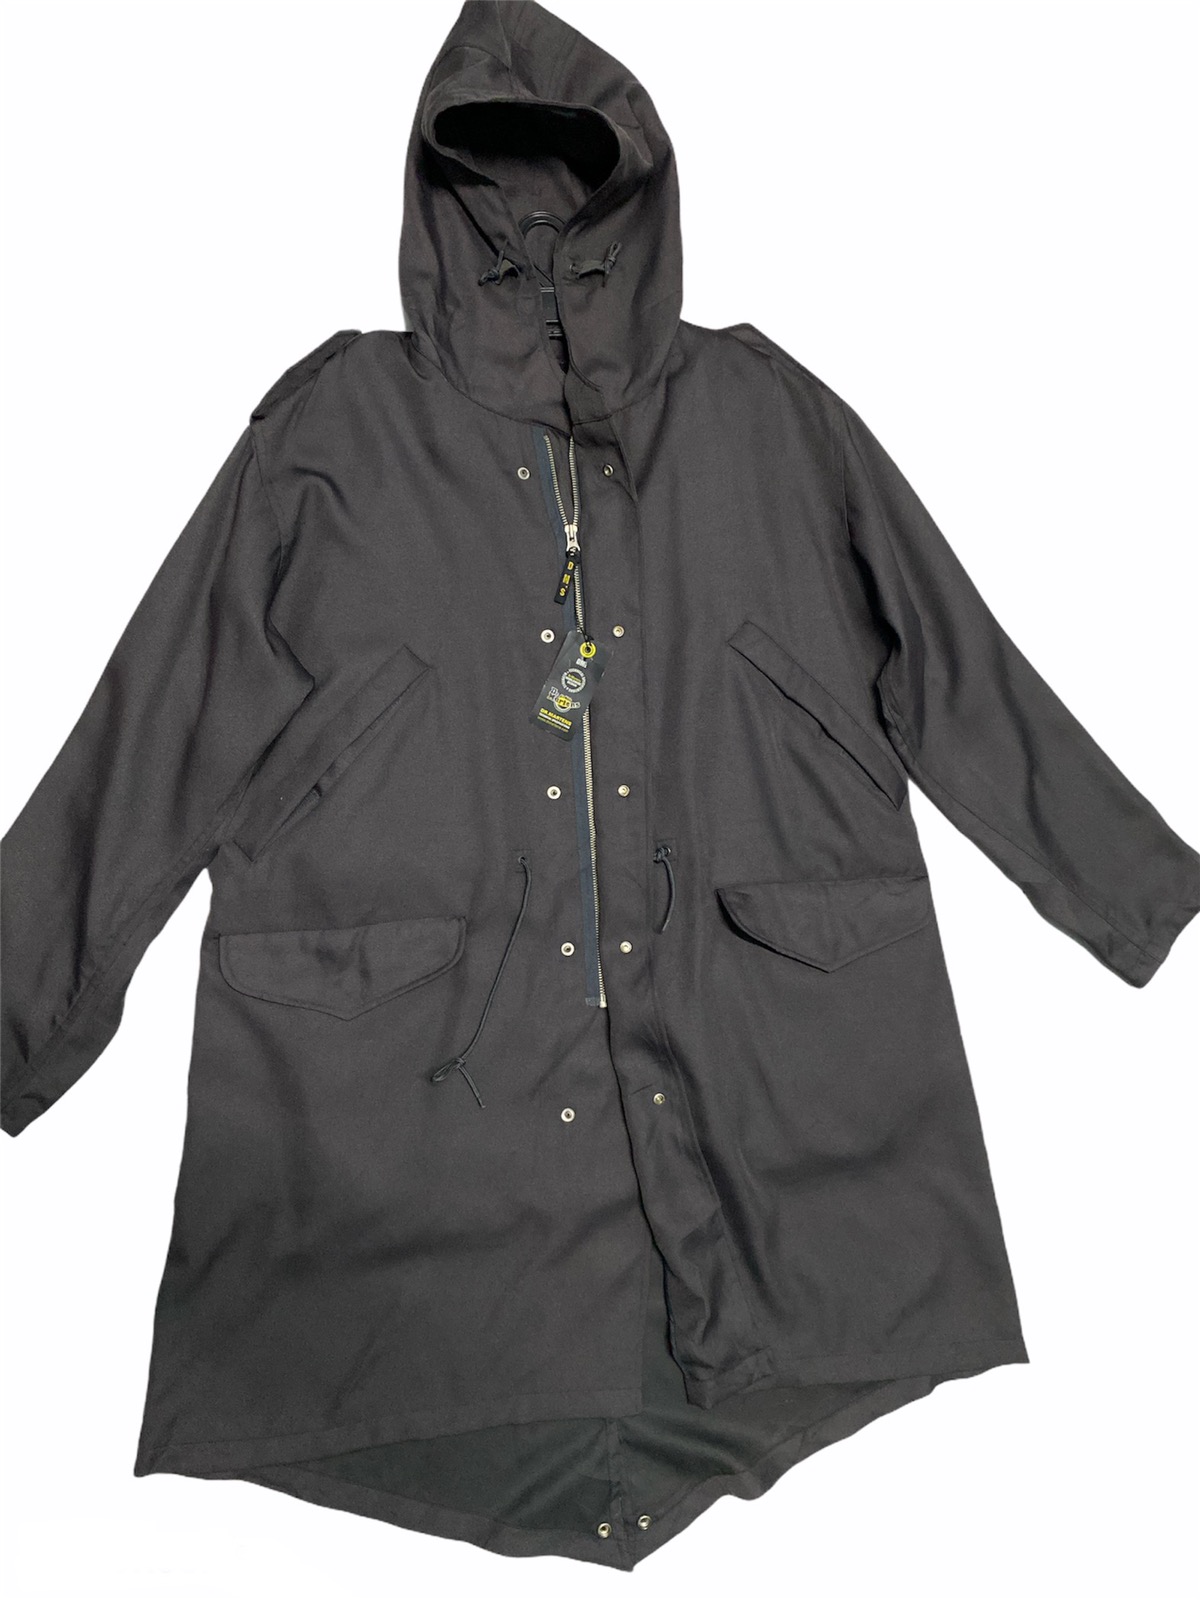 NWT !!!! DR.MARTENS TECHNICAL FISHTAIL PARKA HOODIE - 4